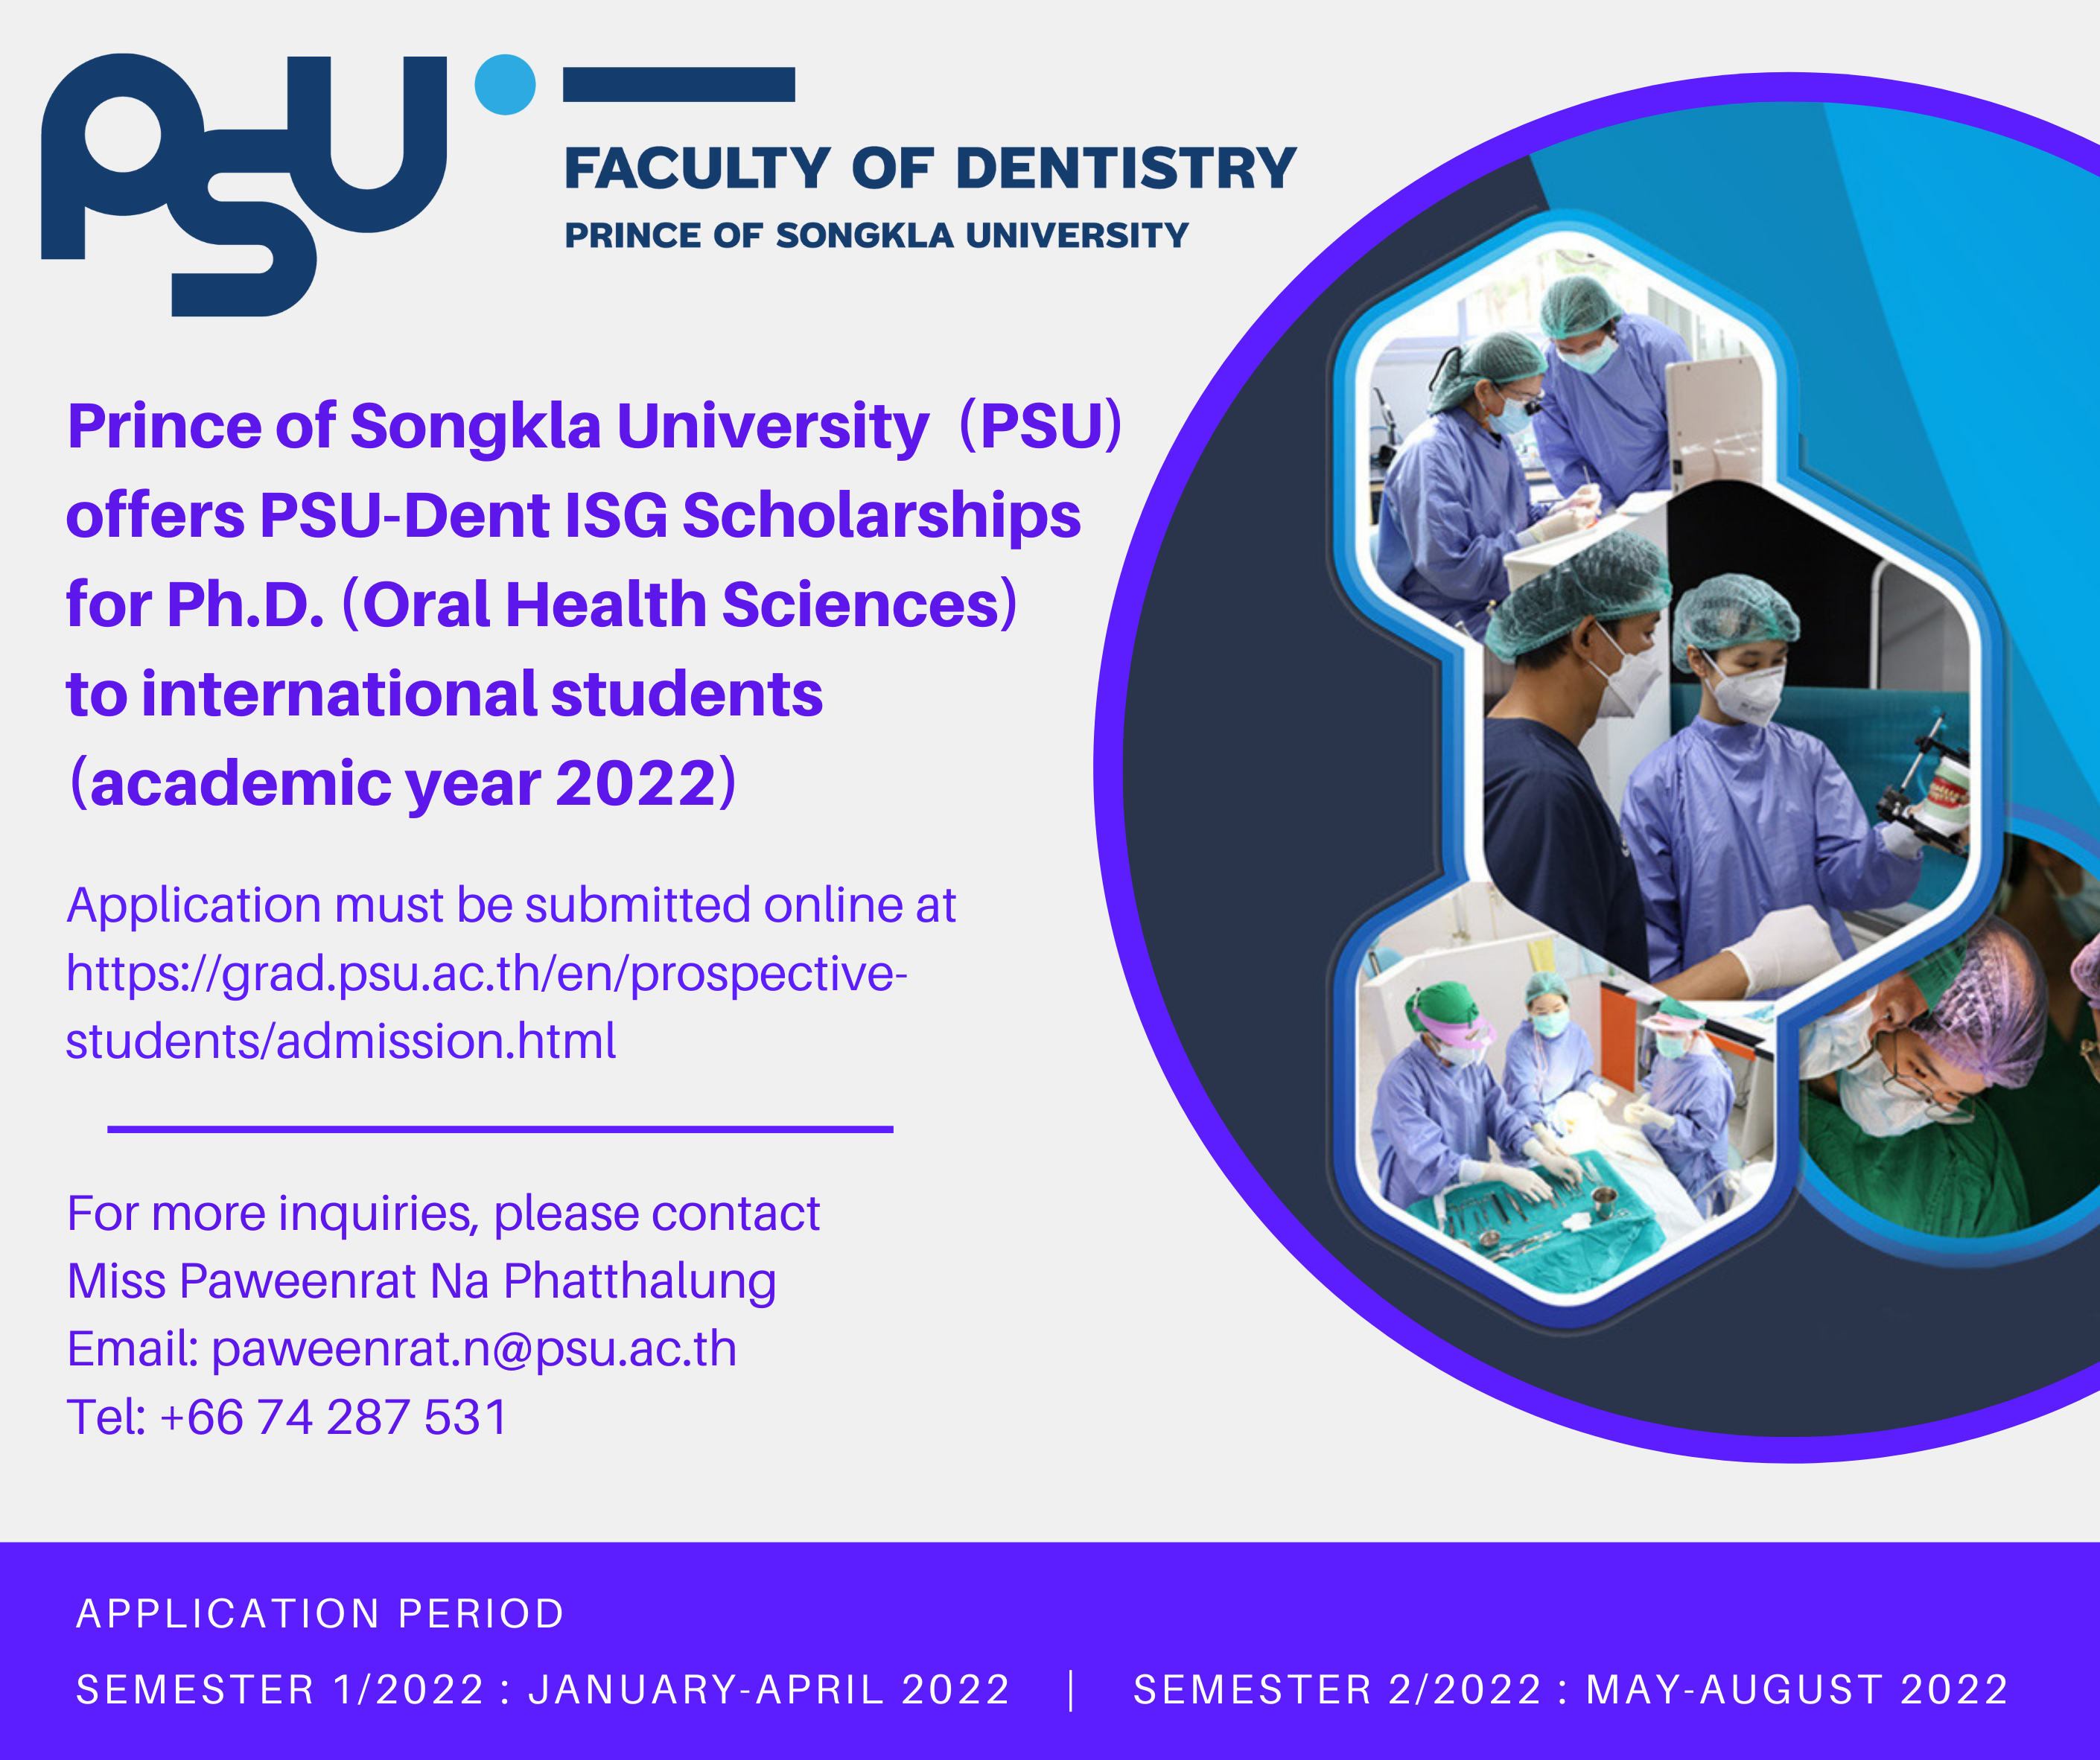 Prince_of_Songkla_University_(PSU)_offers_PSU-Dent_ISG_Scholarships_for_Ph.D._(Oral_Health_Sciences)_to_international_students